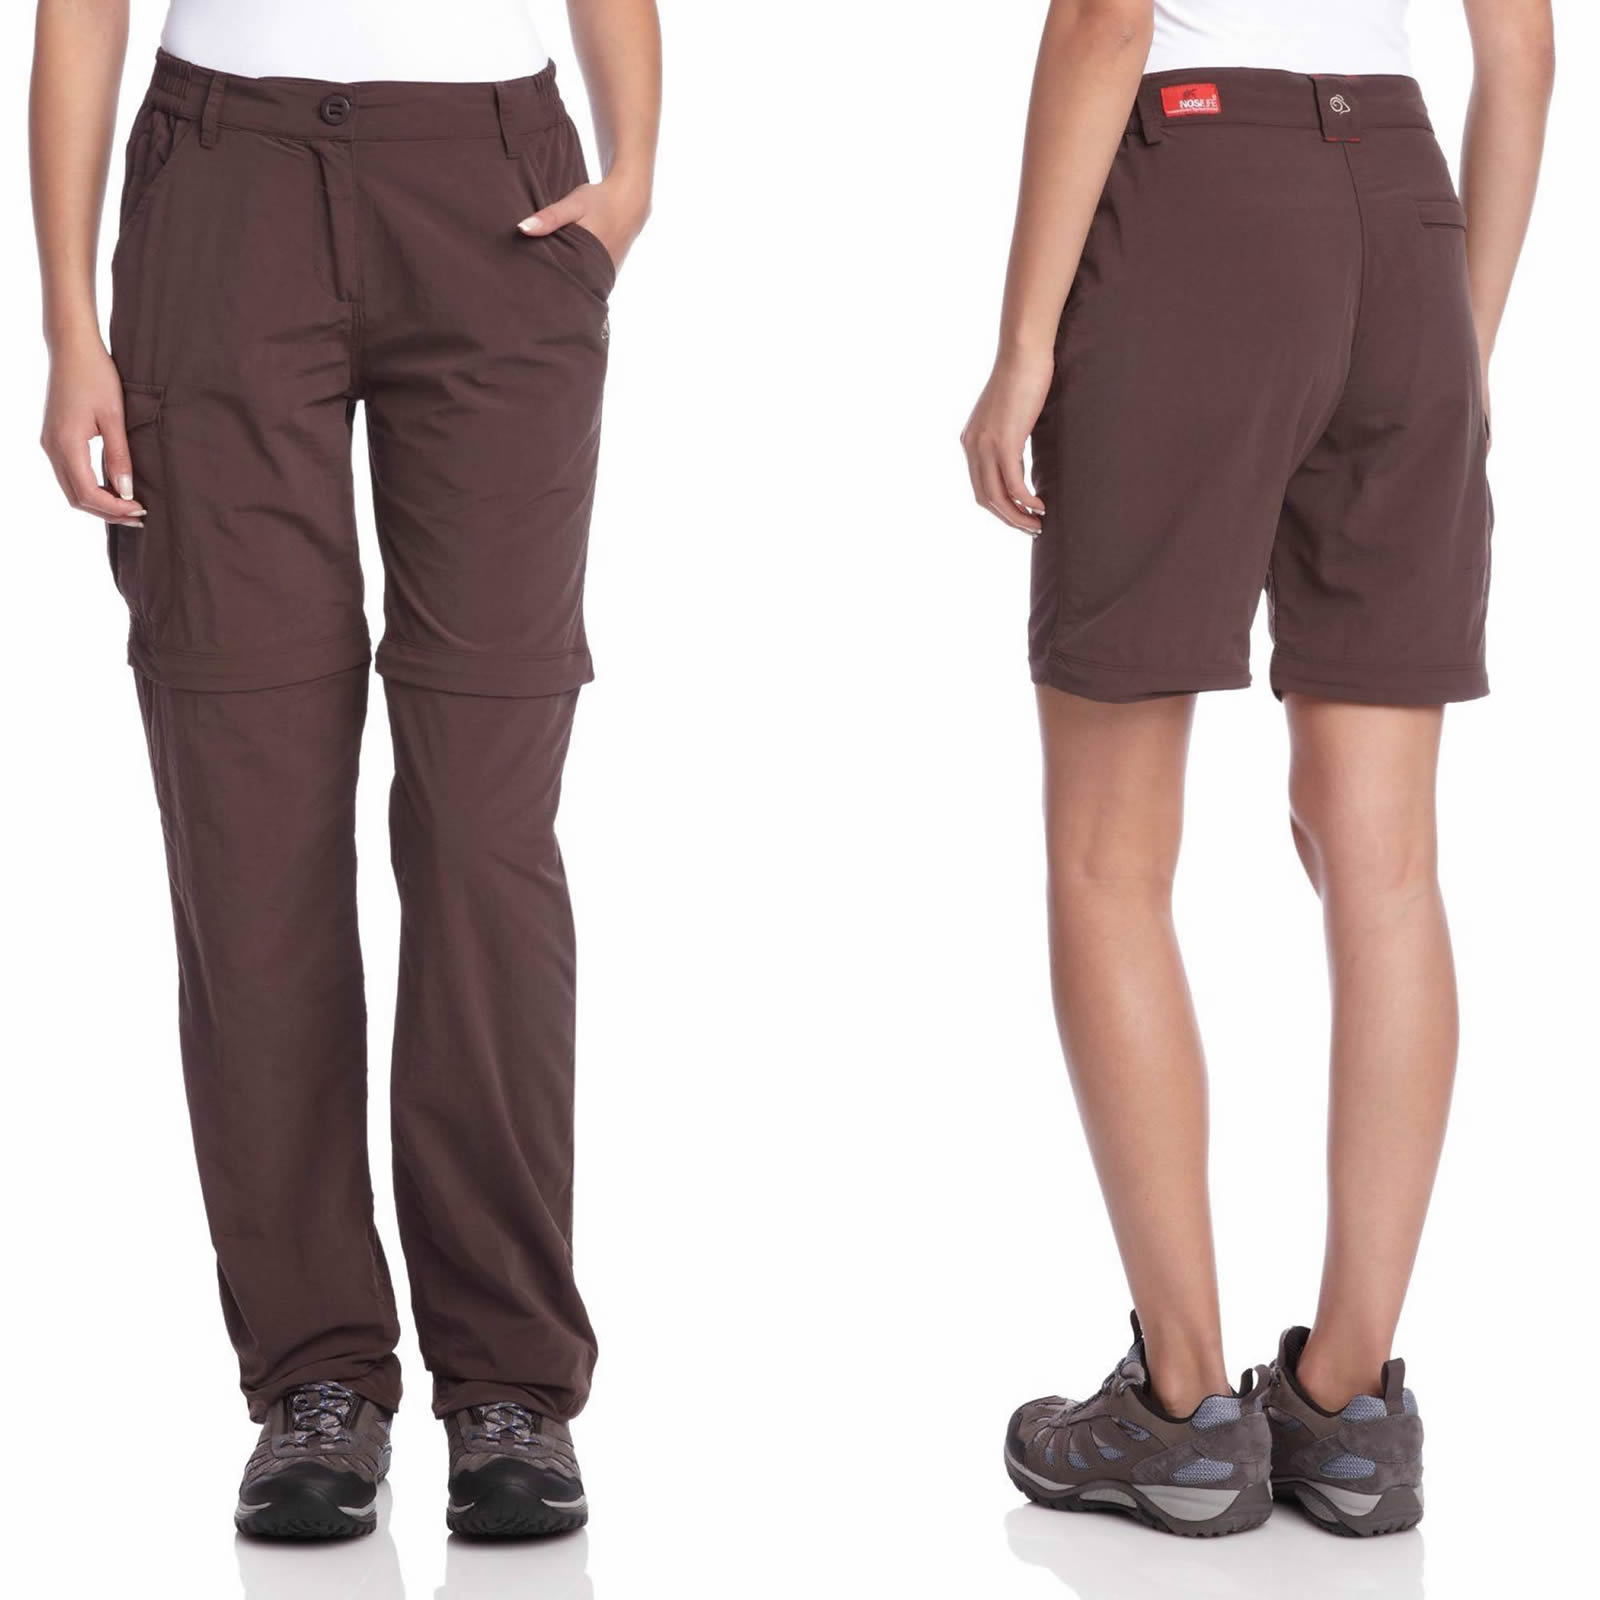 Craghoppers NosiLife Convertible Short Trousers